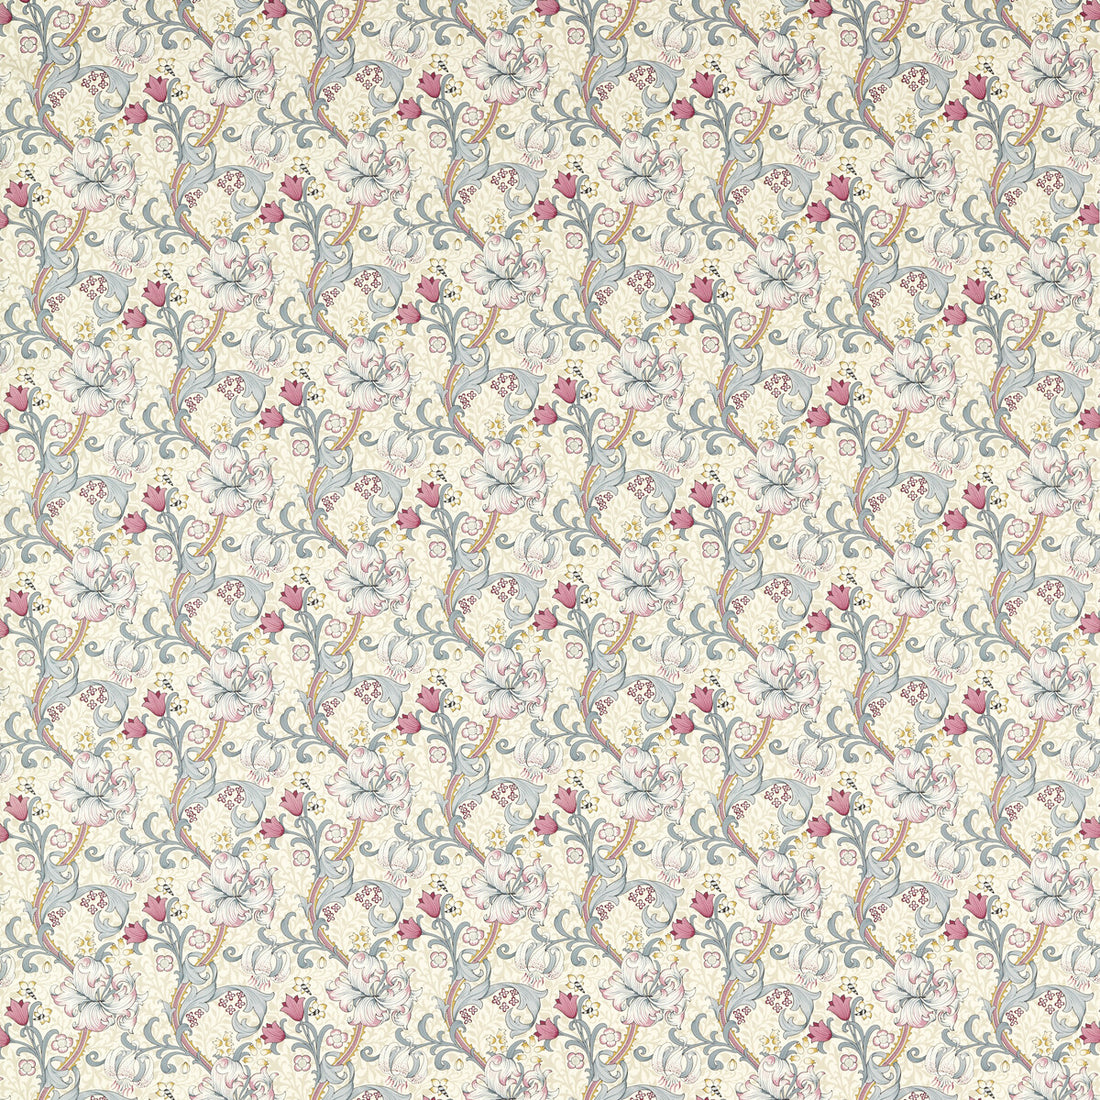 Golden Lily fabric in dove/plum color - pattern F1677/01.CAC.0 - by Clarke And Clarke in the Clarke &amp; Clarke William Morris Designs collection